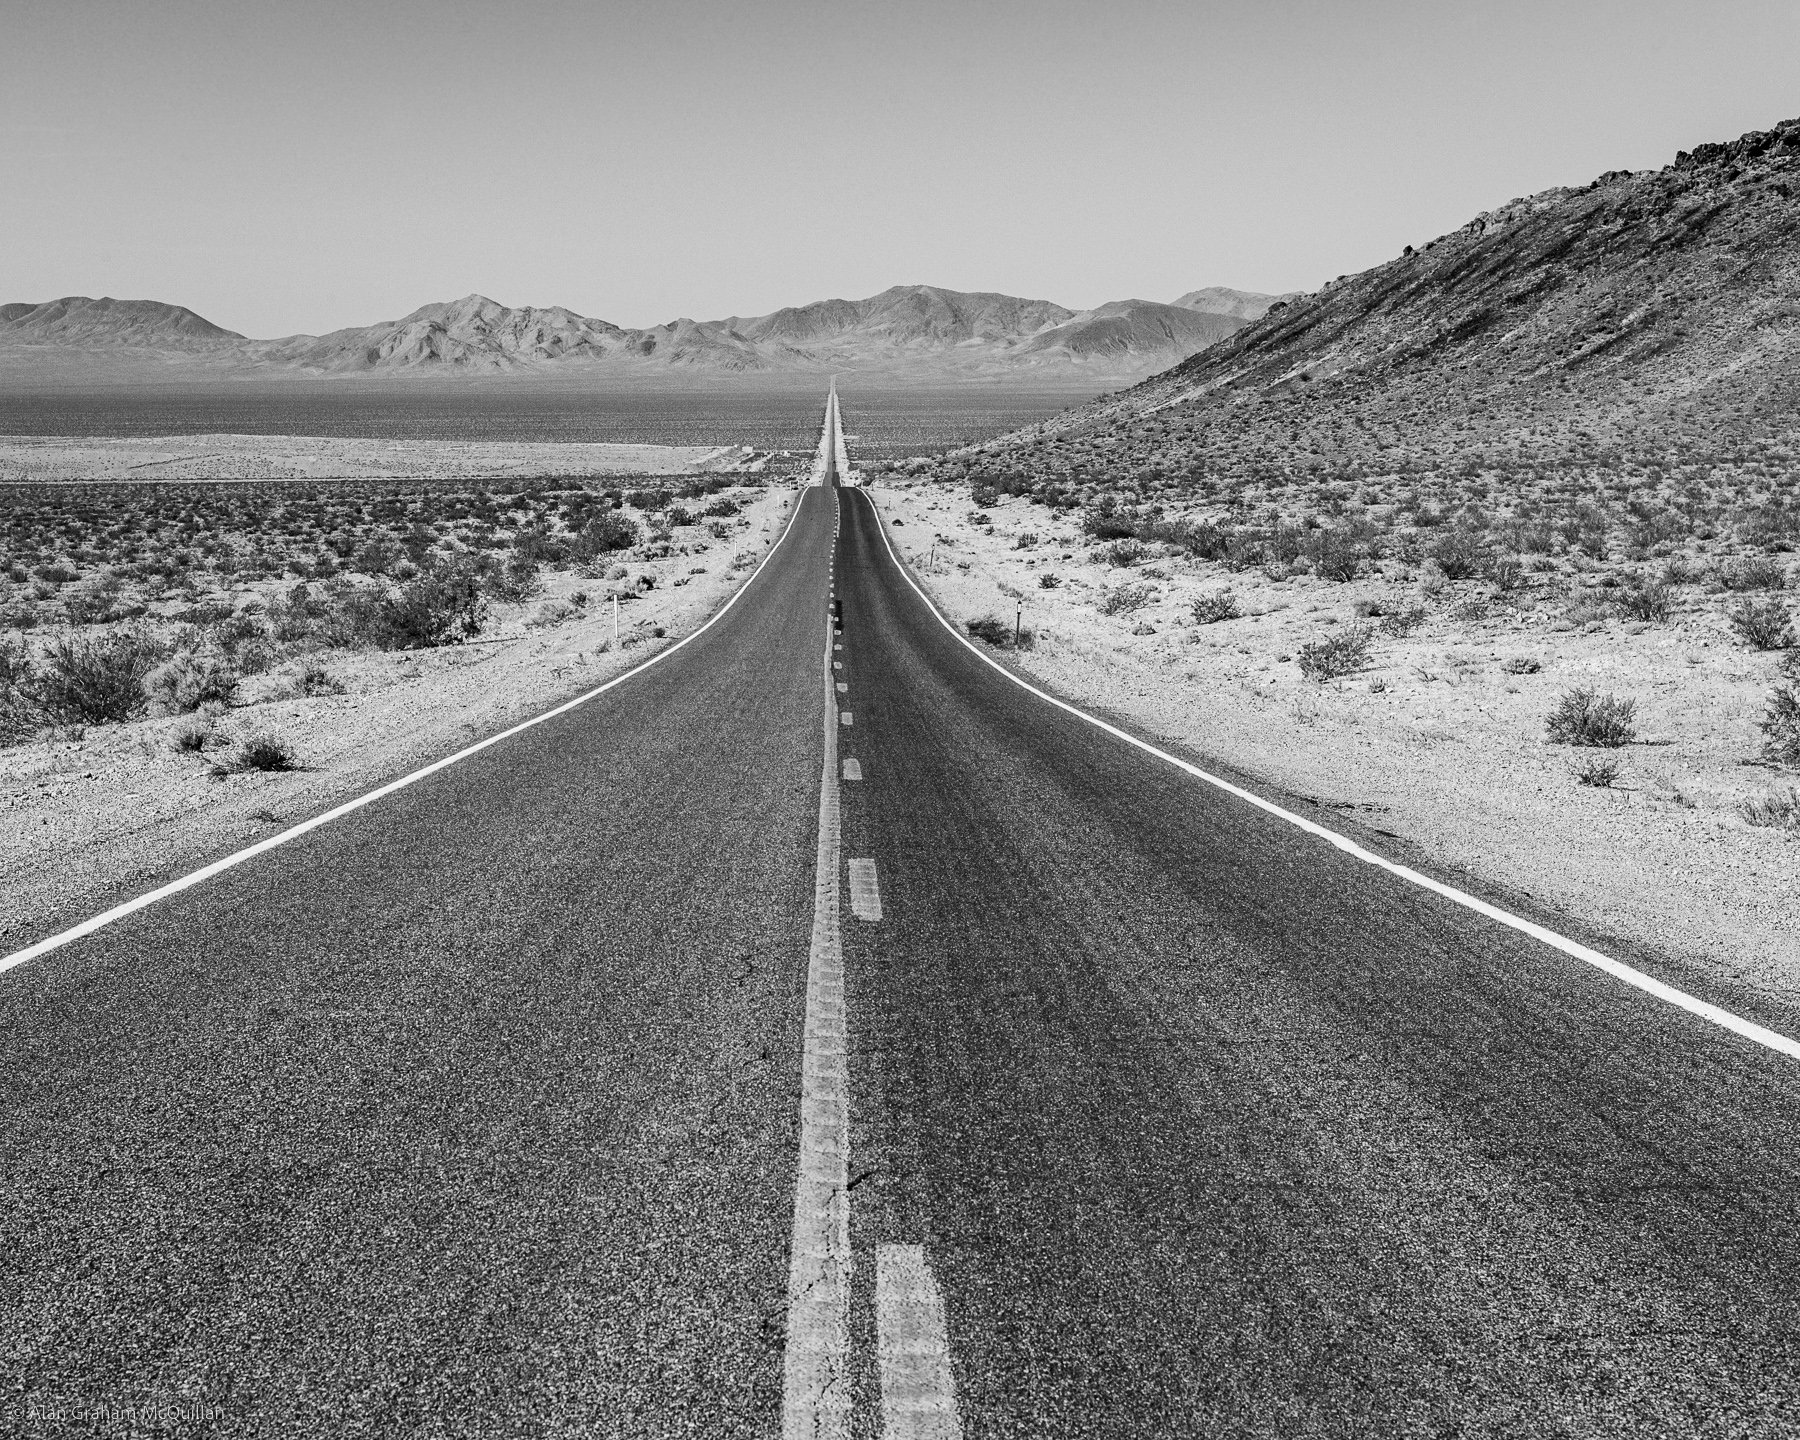 Daylight Pass Road, Death Valley National Park, California, 2021